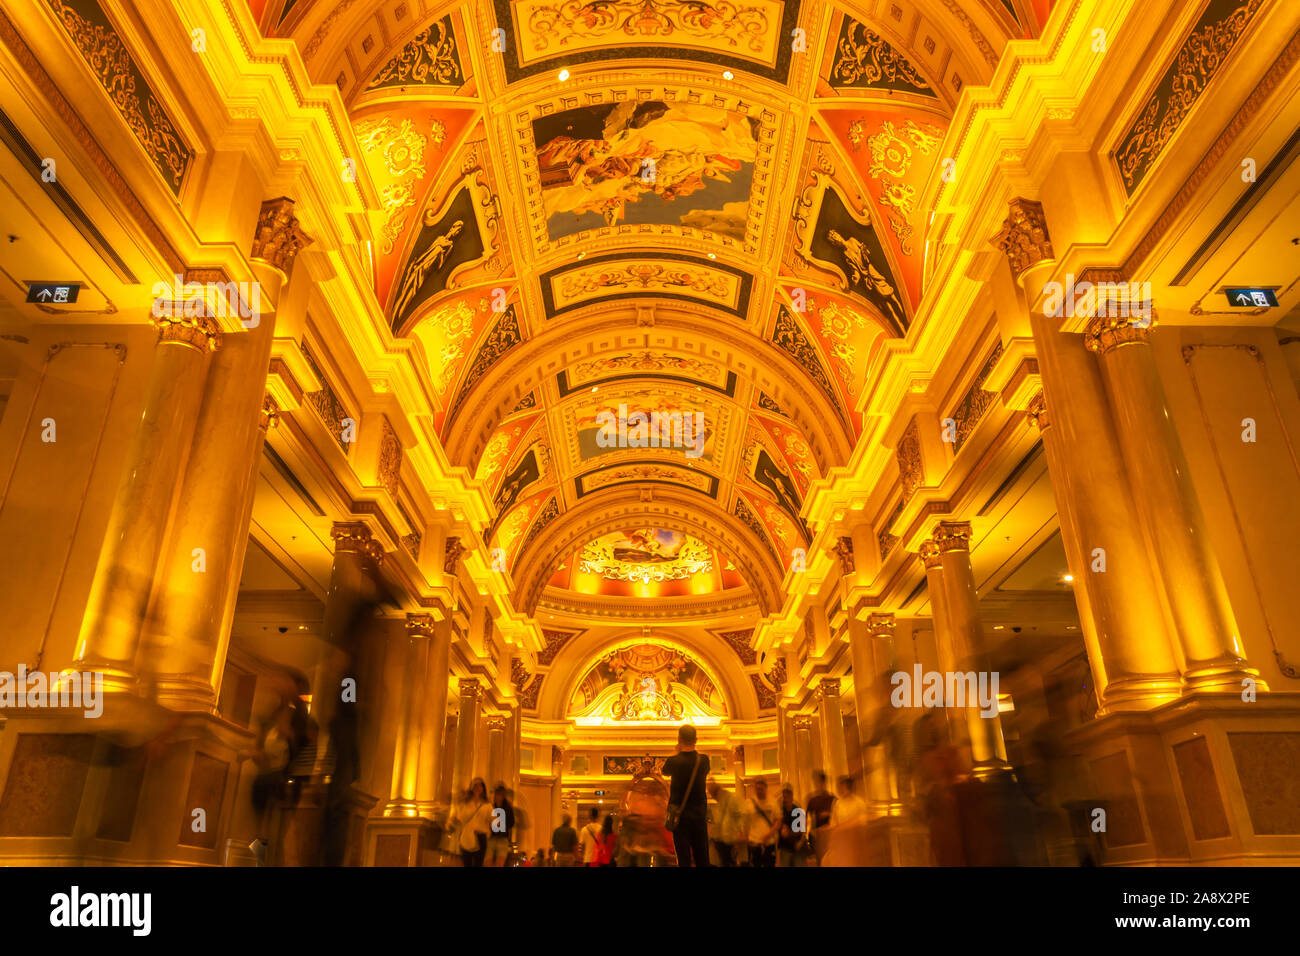 October 31, 2019: MACAU, CHINA - Interior of the Venetian Hotel and Casino, Largest Supercomplex in the World Stock Photo